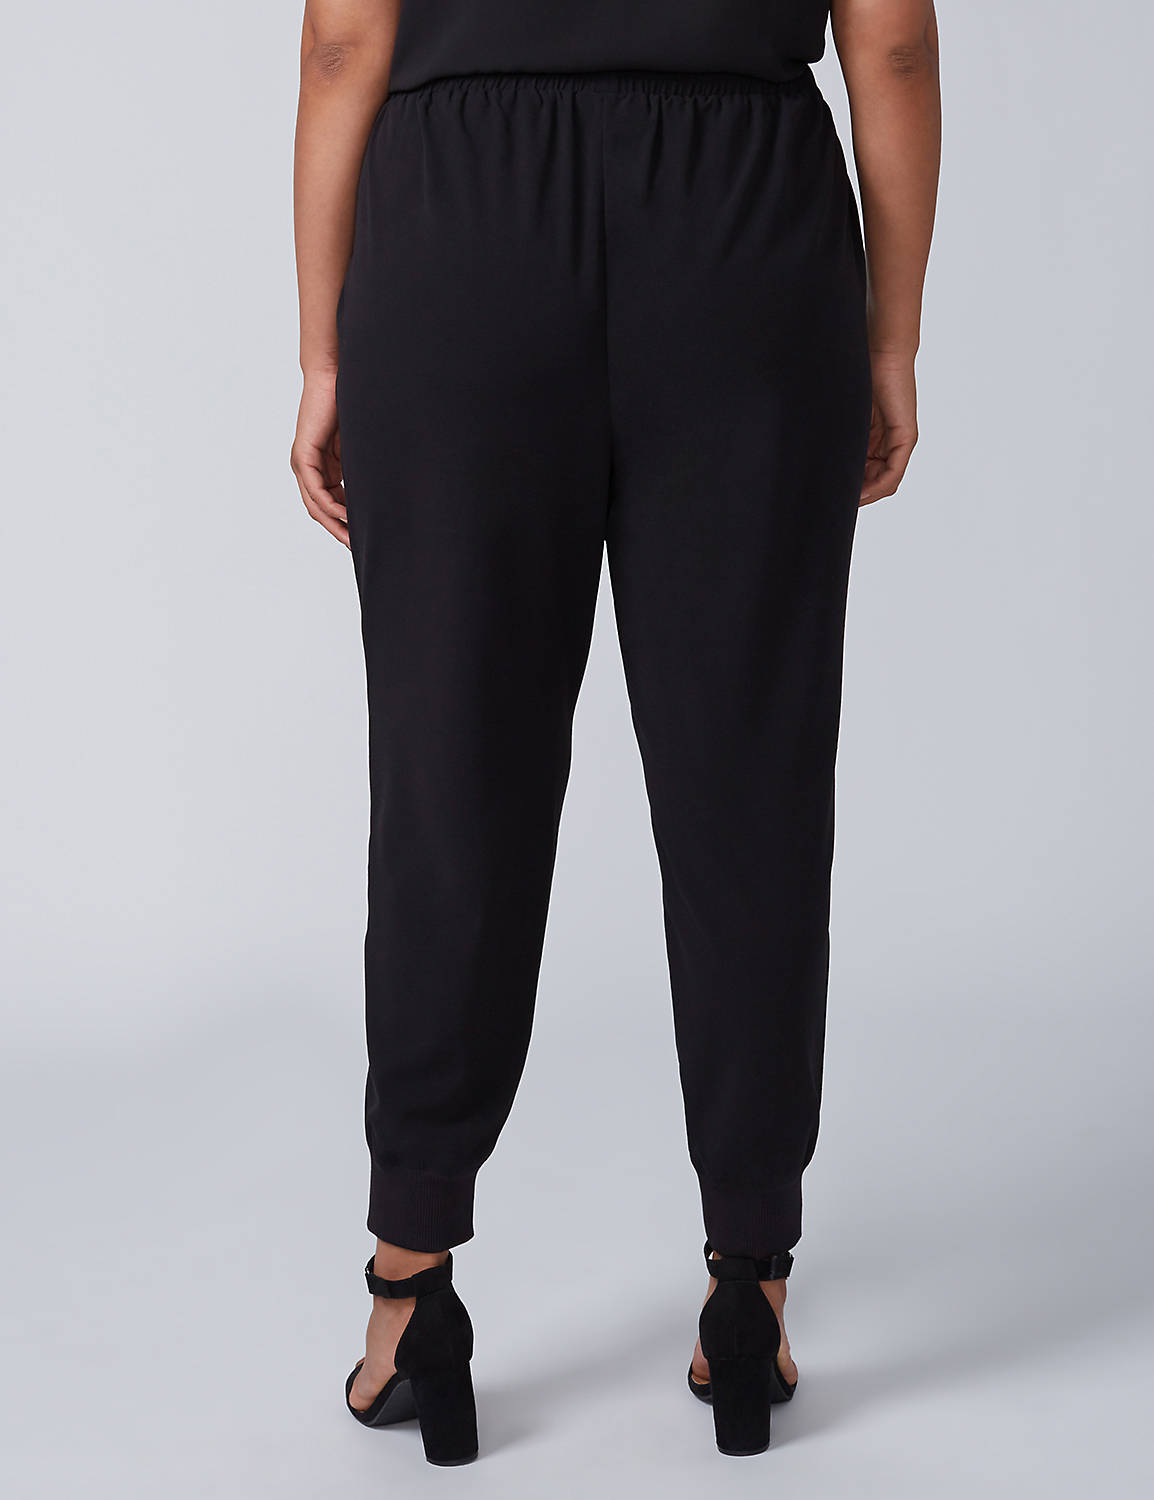 Tailored Stretch Jogger Product Image 2